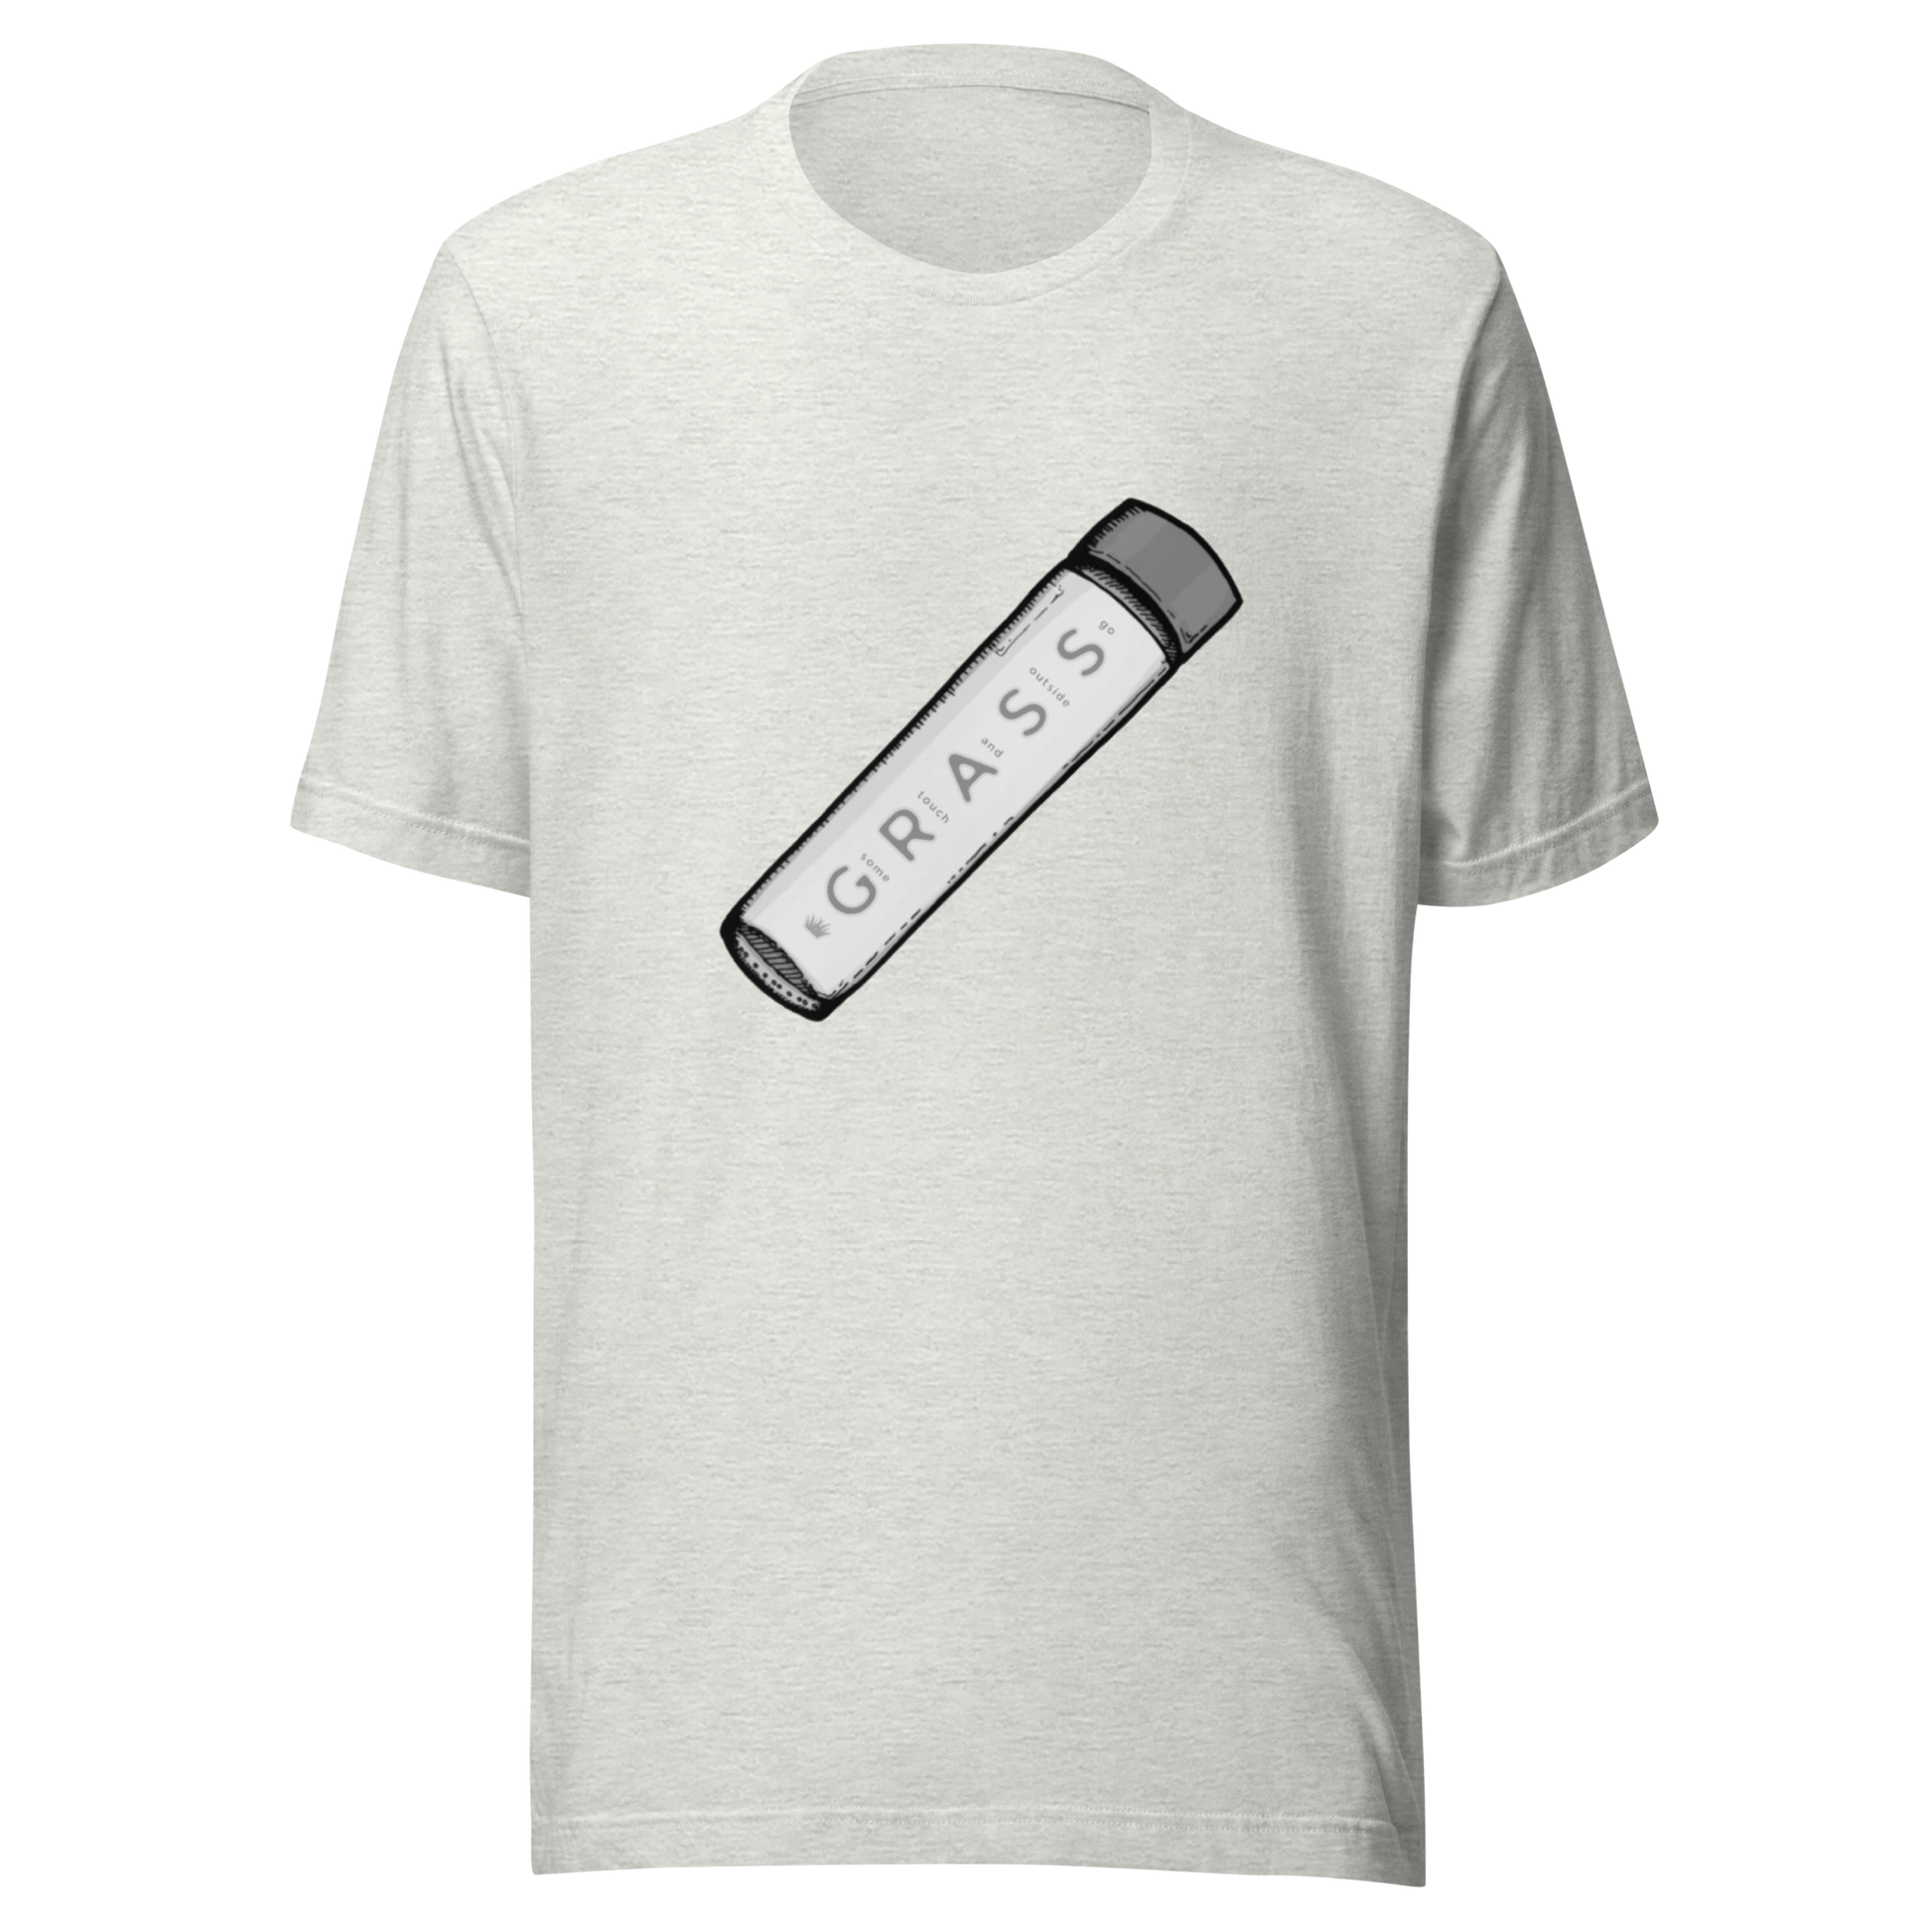 touch some grass t-shirt in white - gaslit apparel